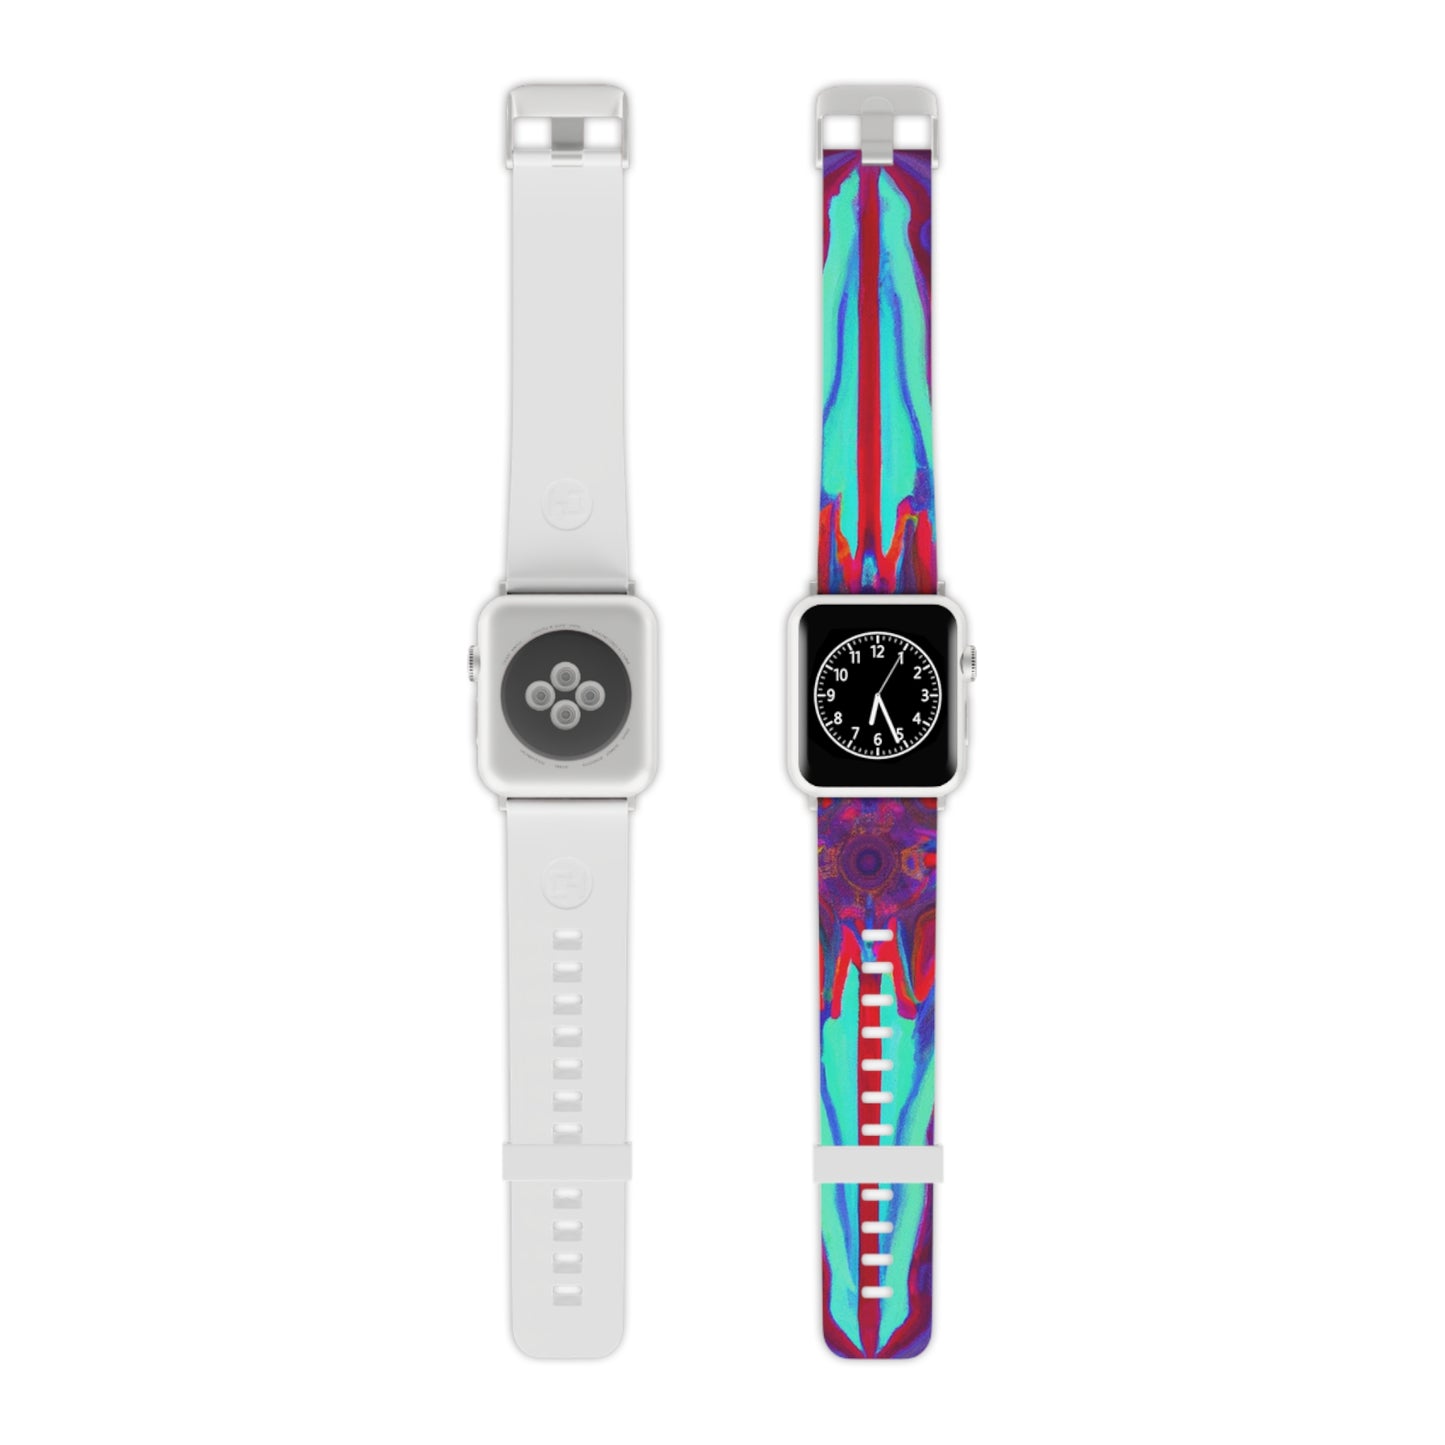 Hector Mueller - Trippy Hippy Boho Psychedelic Apple Wrist Watch Band